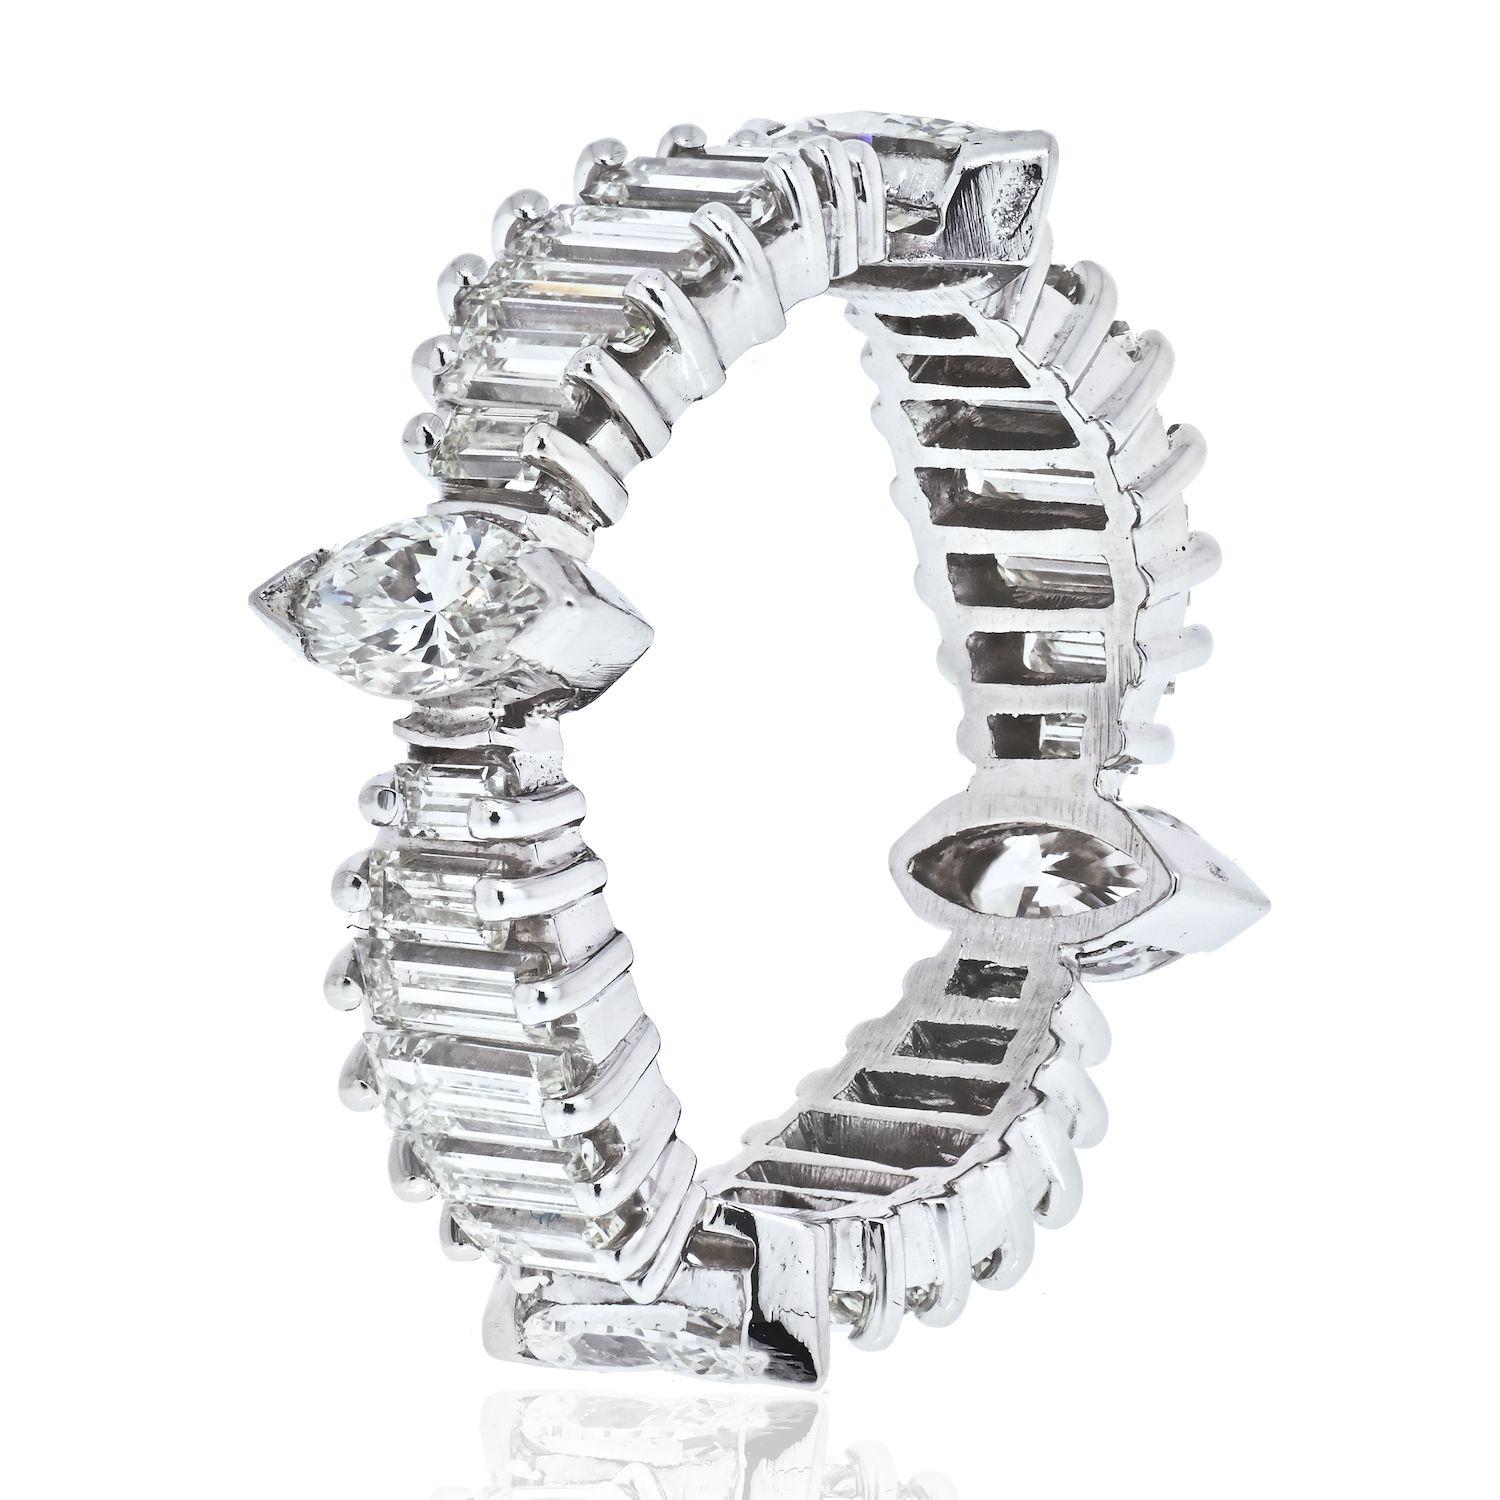 Own this fun vintage platinum diamond eternity band from 1950's. It is set with 3.25cts of vintage cut baguette and marquise cut diamonds. It can be worn as a wedding band, eternity ring or just a fun index finger band. You decide! 
One thing we